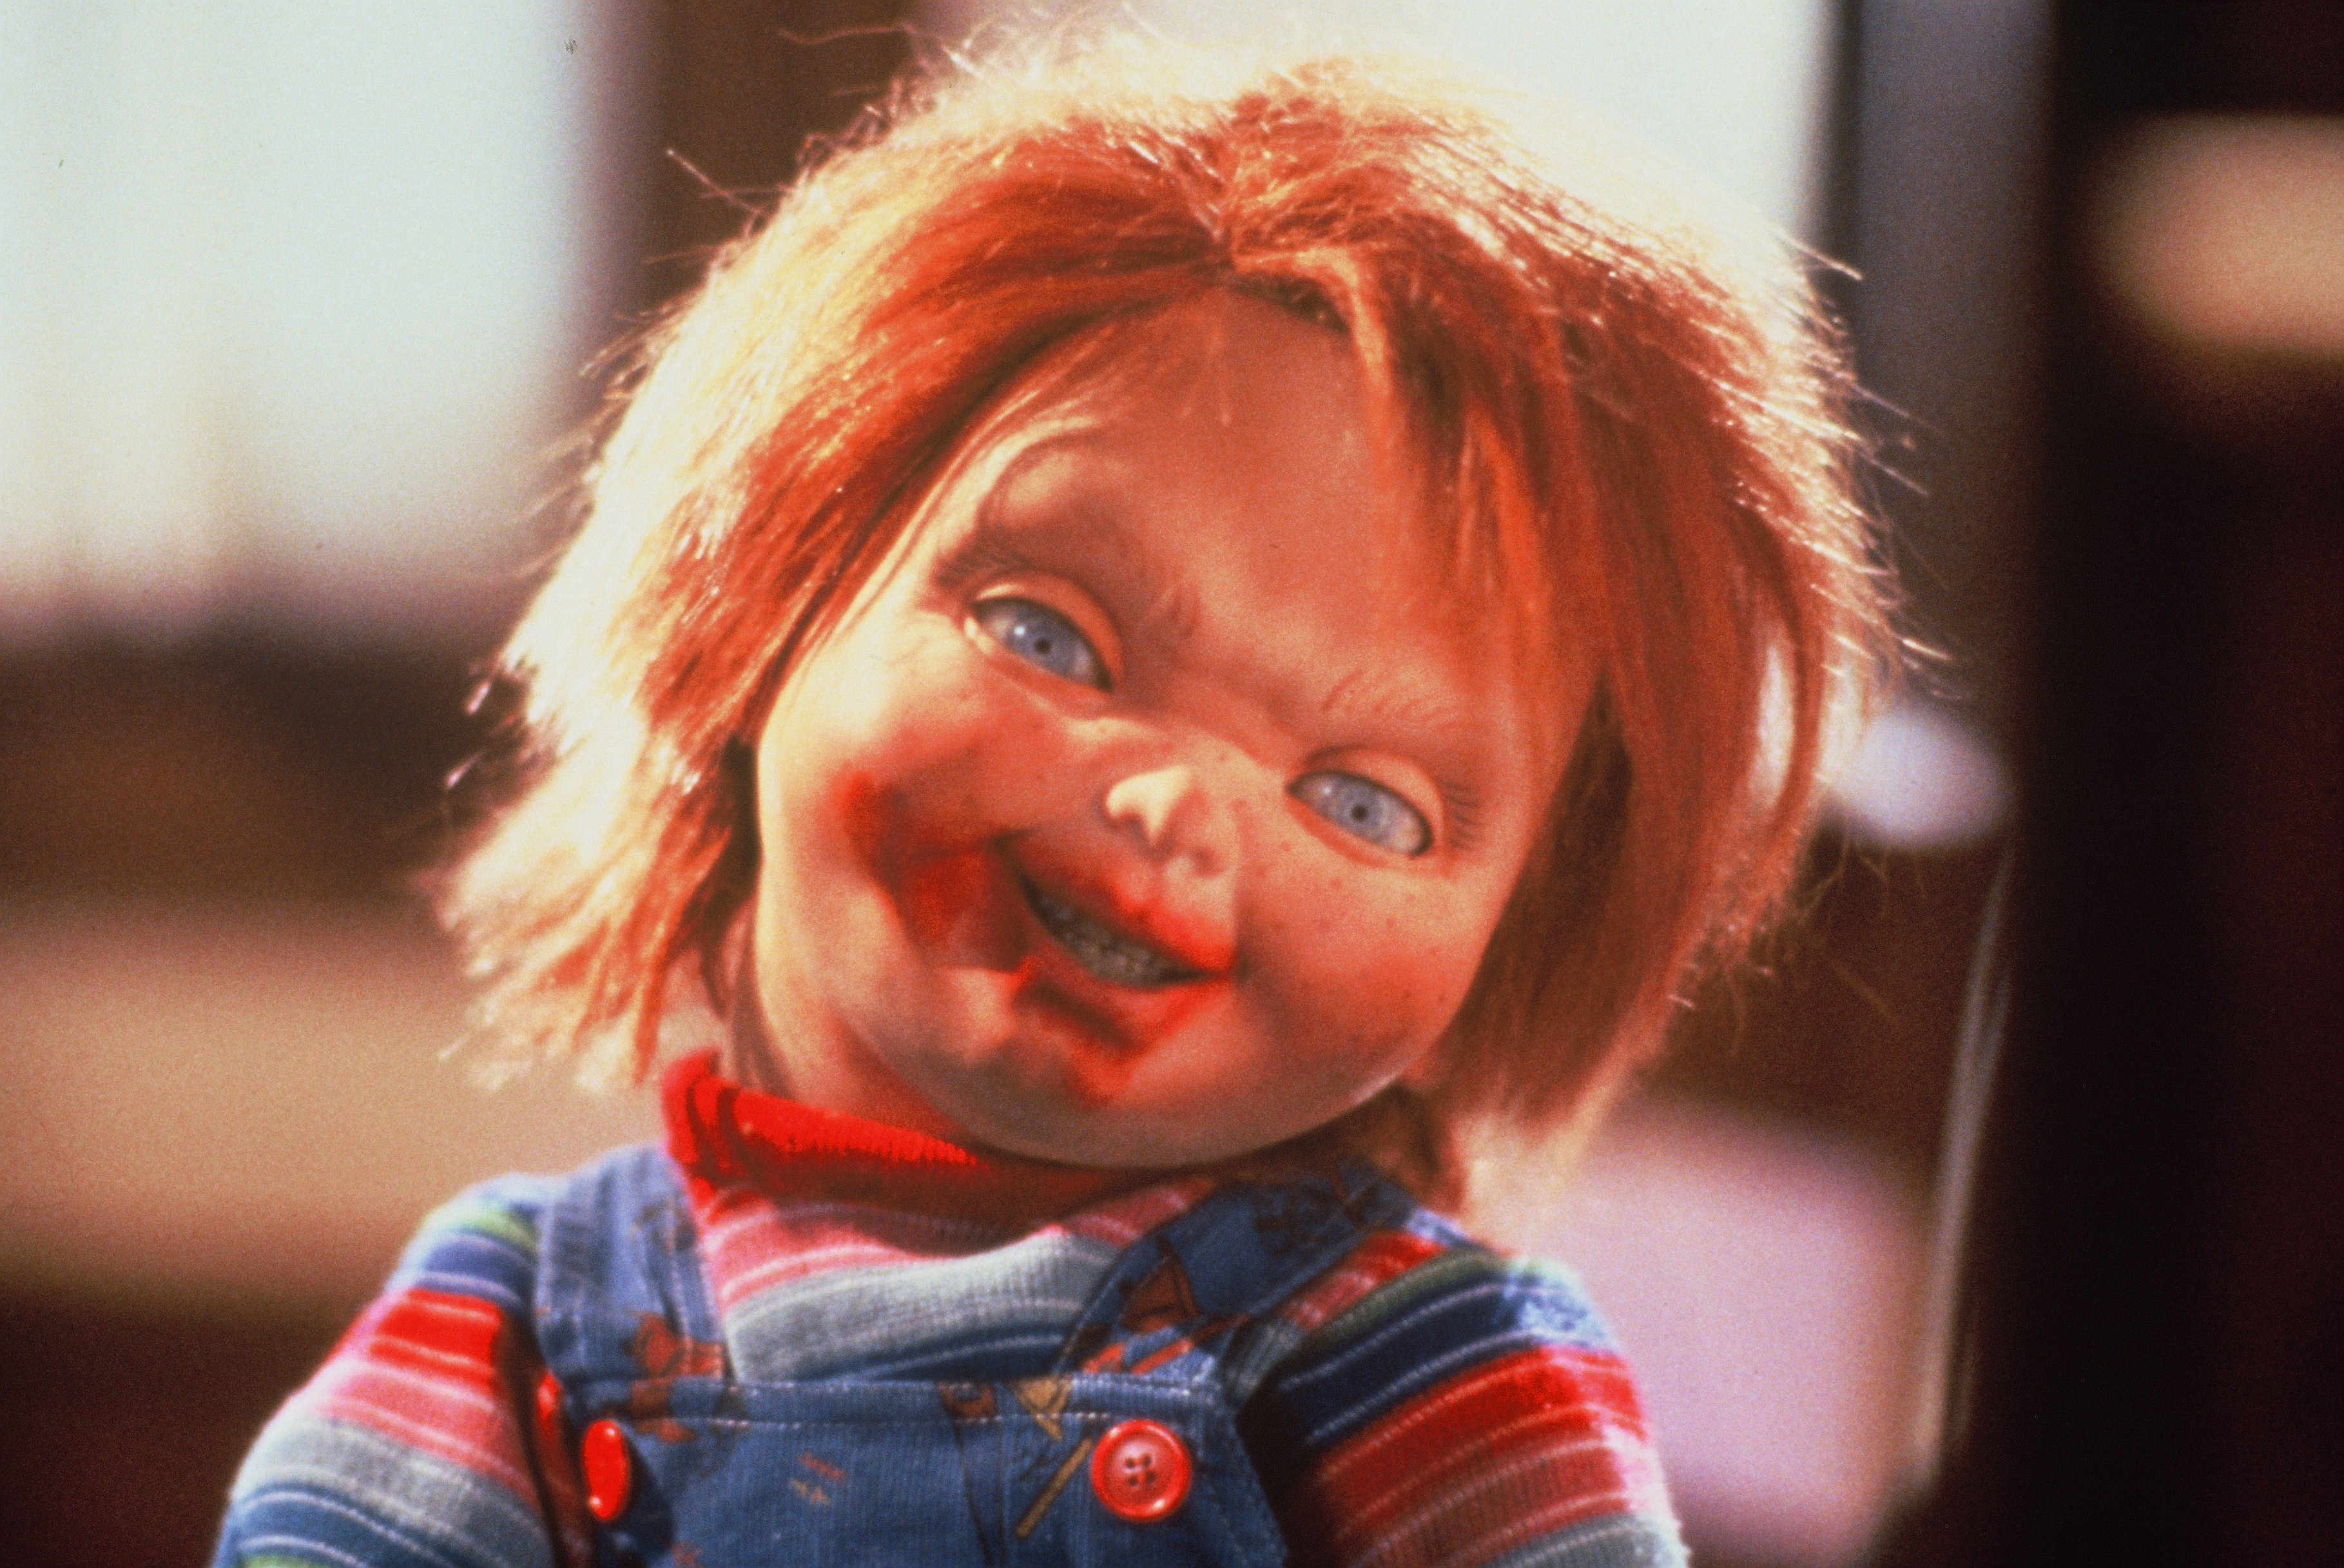 Cult of Chucky': The Next 'Child's Play' Begins Filming on Monday ...